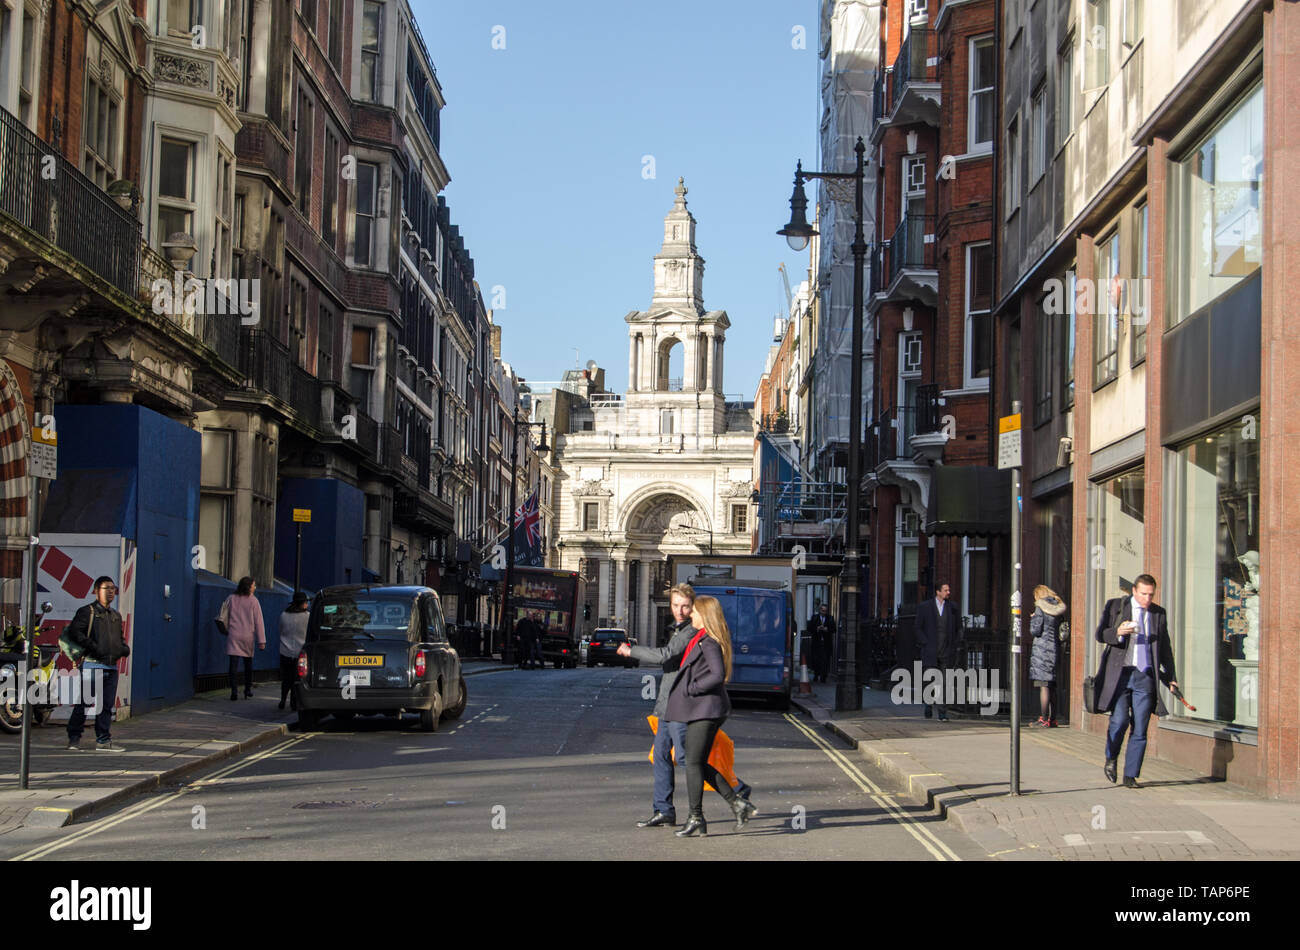 LONDON, UK - JANUARY 28, 2016: Pedestrians and traffic on Half Moon Street in Mayfair, London. View from Piccadilly towards Curzon Street and the land Stock Photo